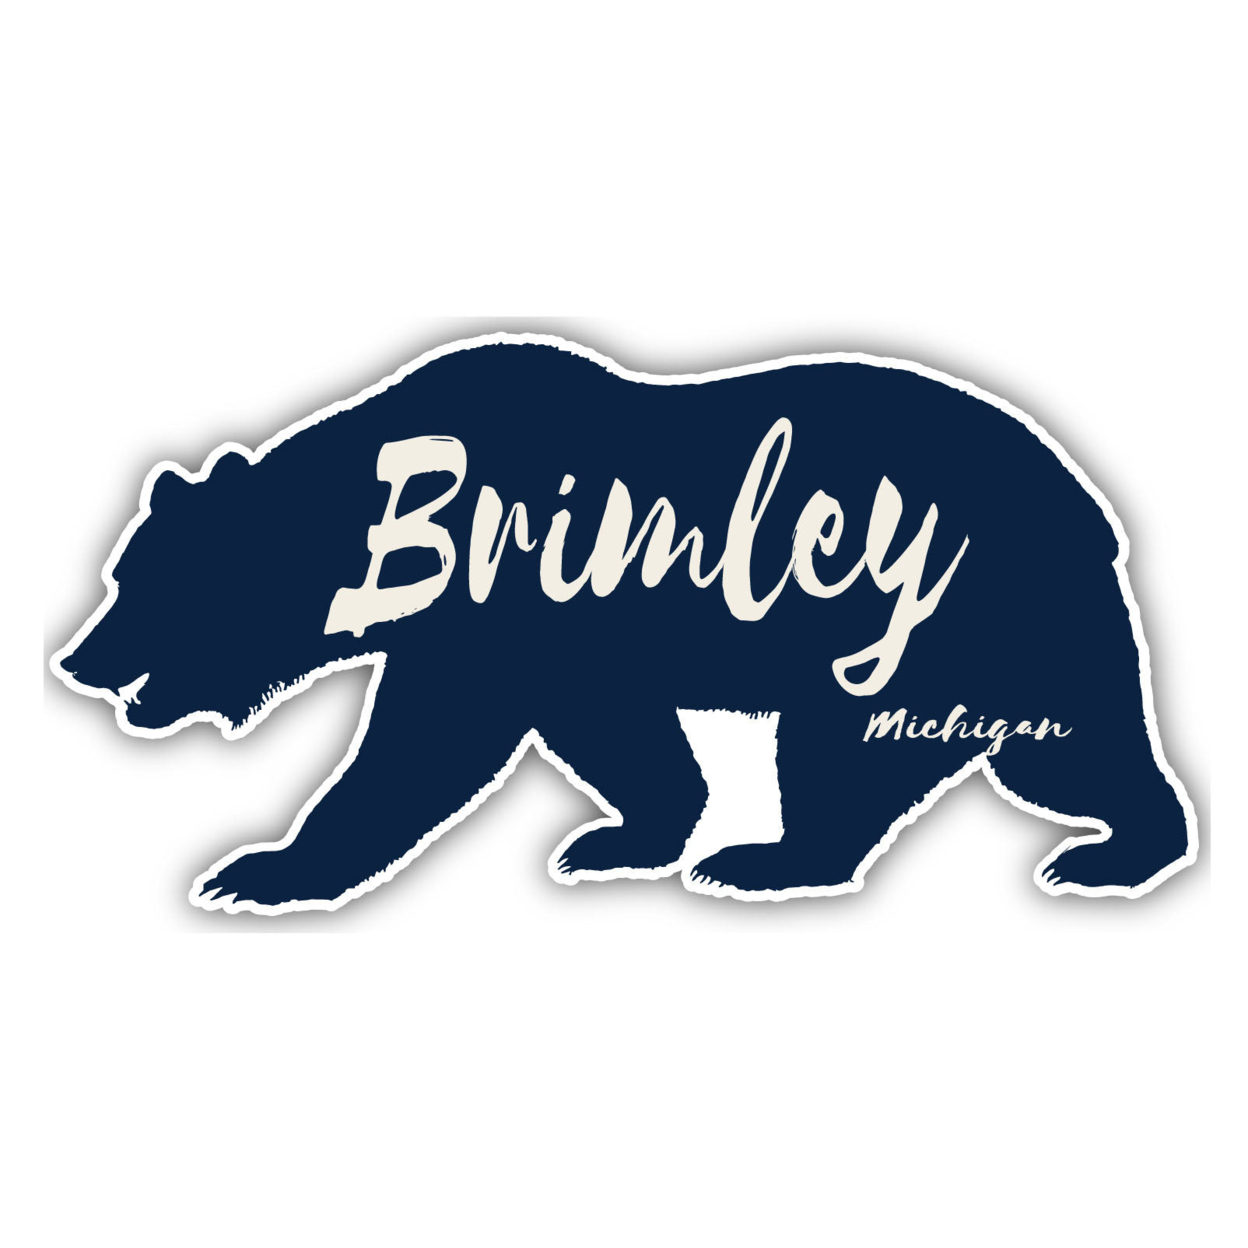 Brimley Michigan Souvenir Decorative Stickers (Choose Theme And Size) - 4-Pack, 10-Inch, Bear